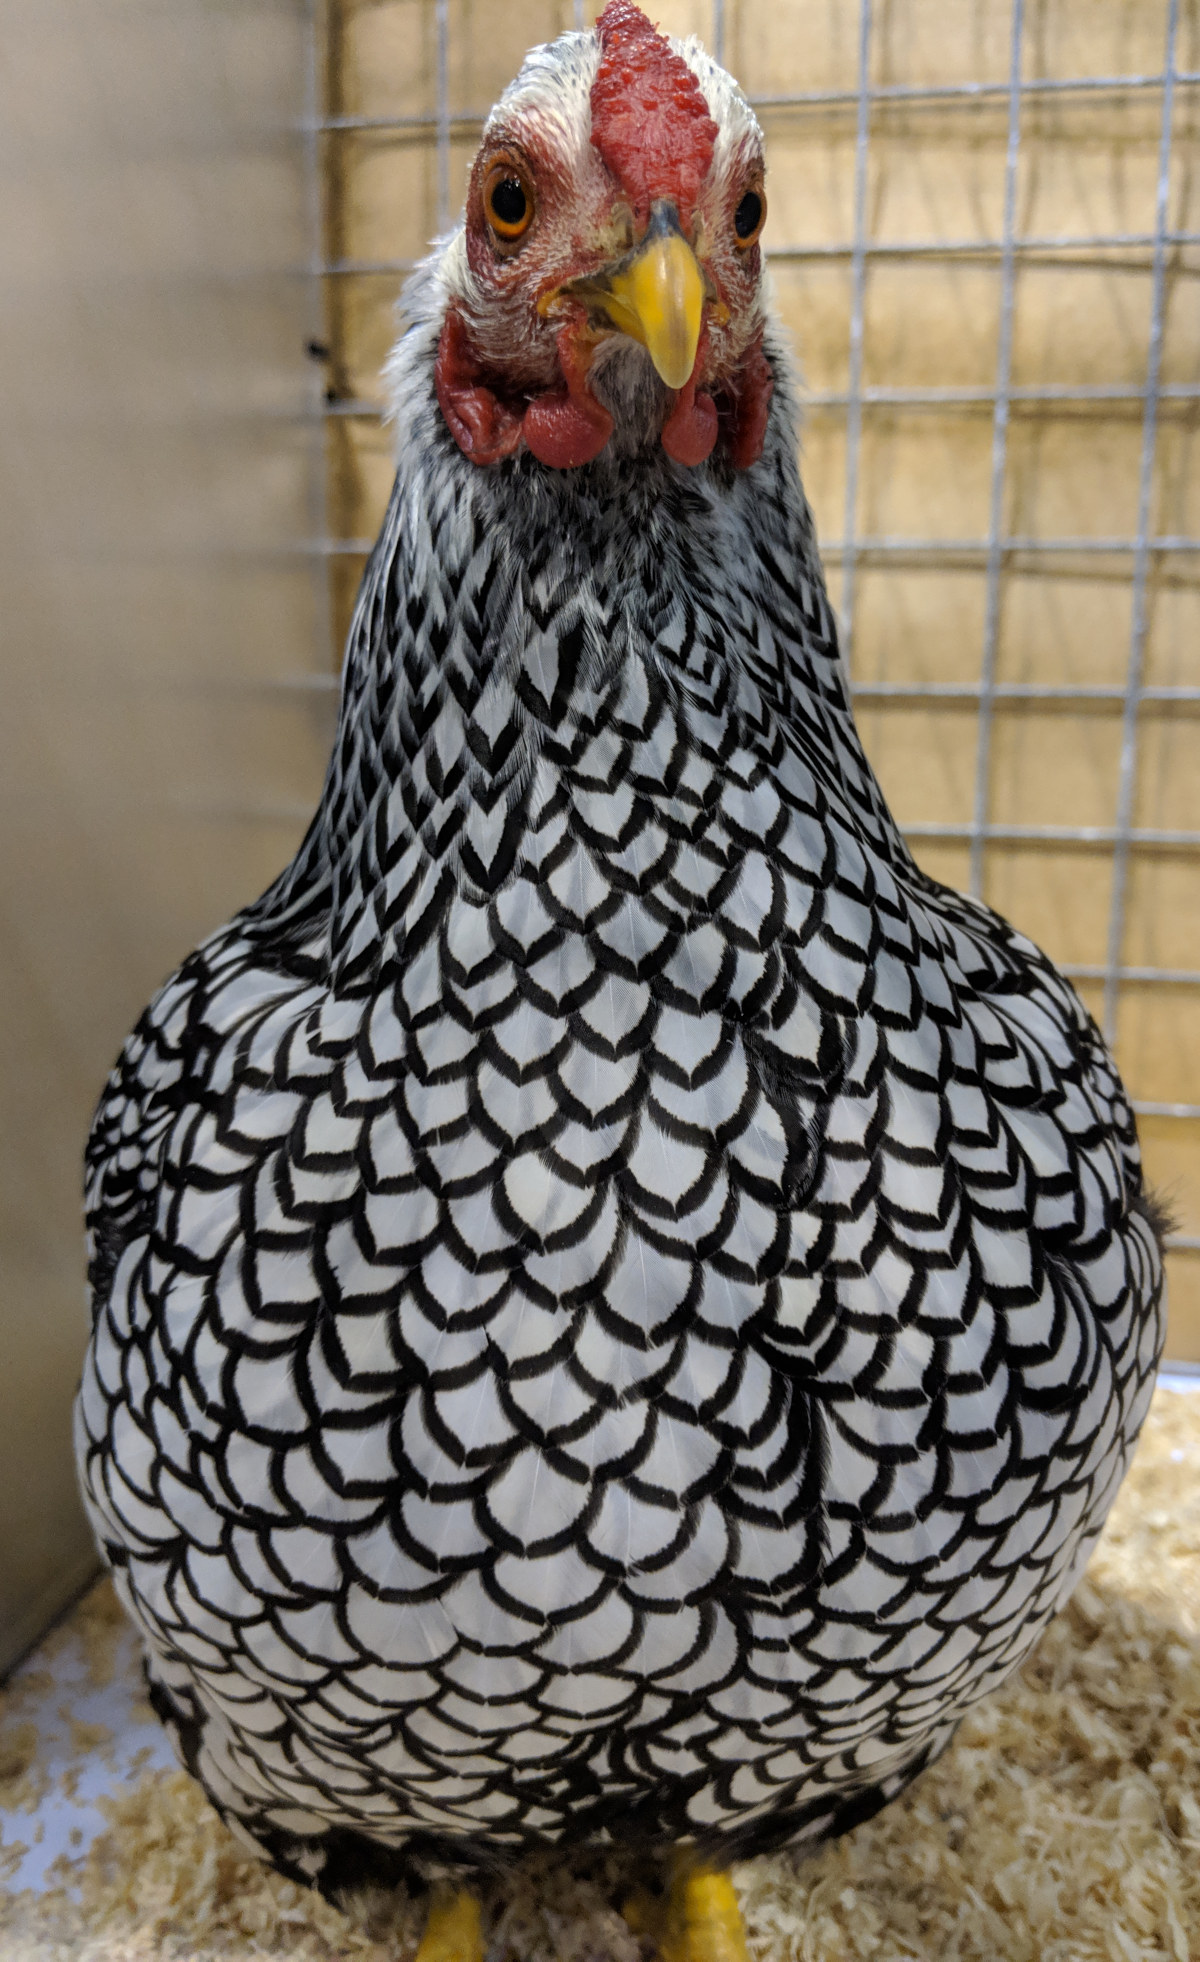 The silver laced Wyandotte was the first to be bred.